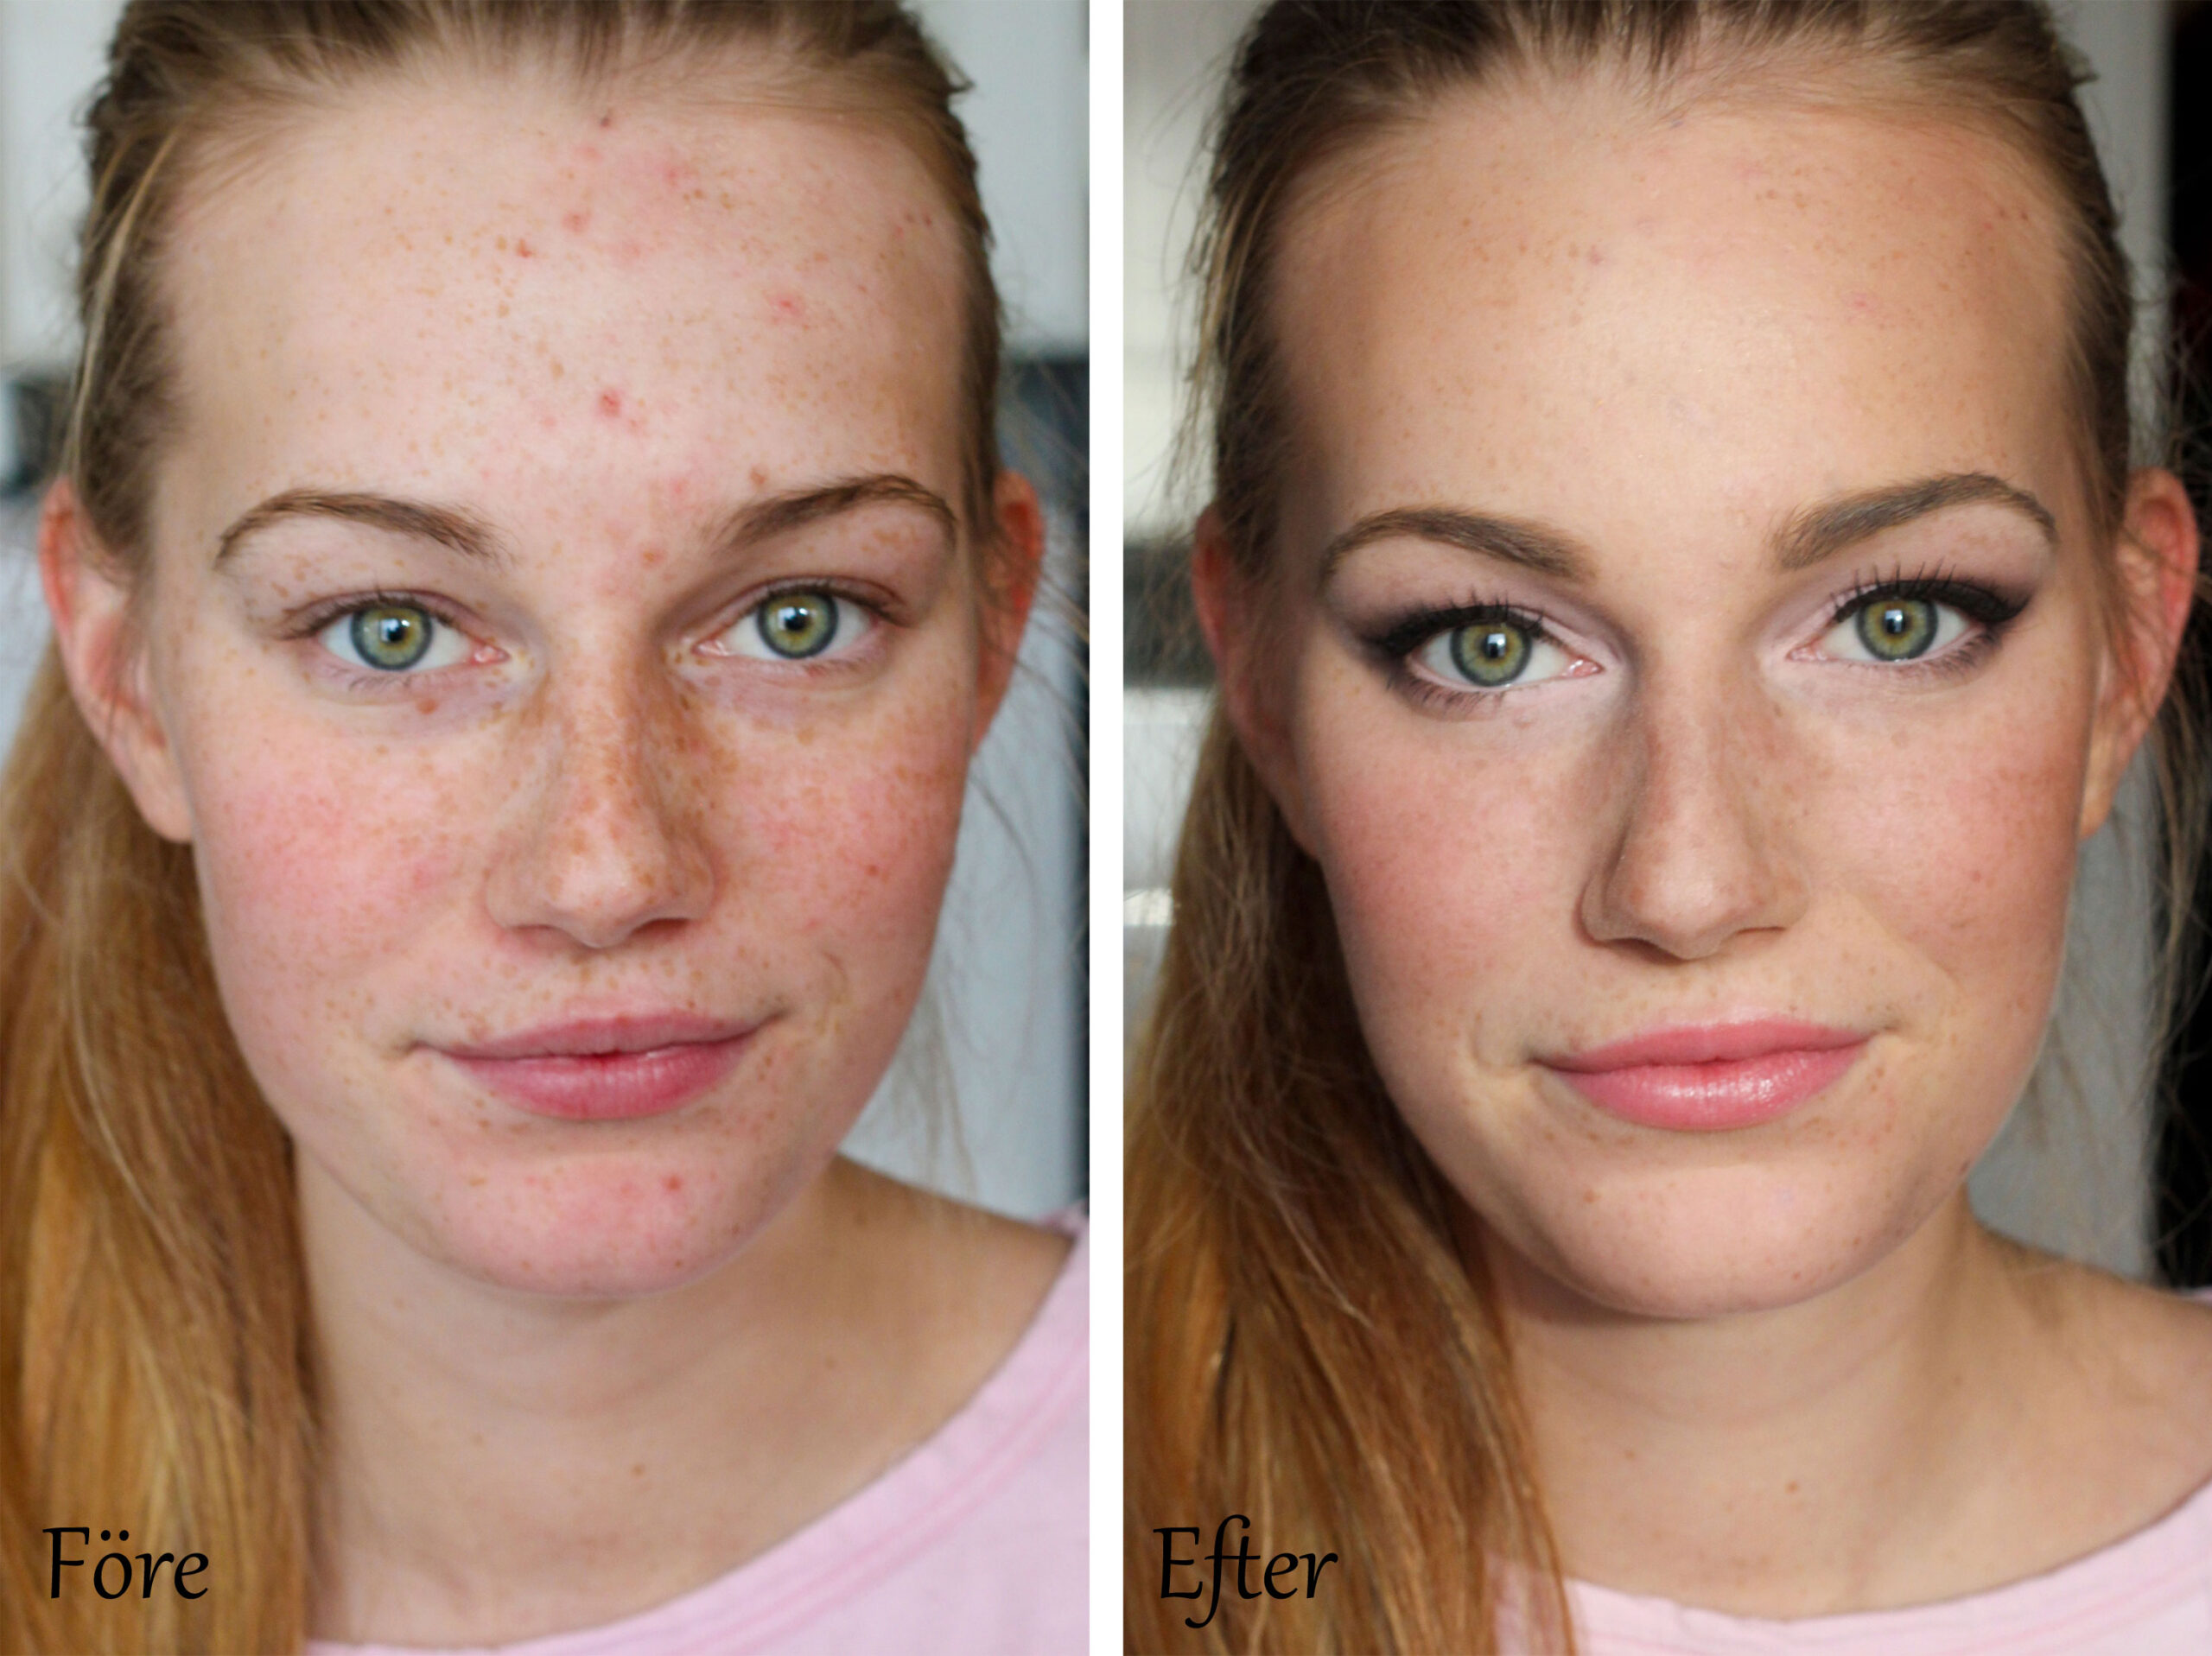 before-and-after makeup